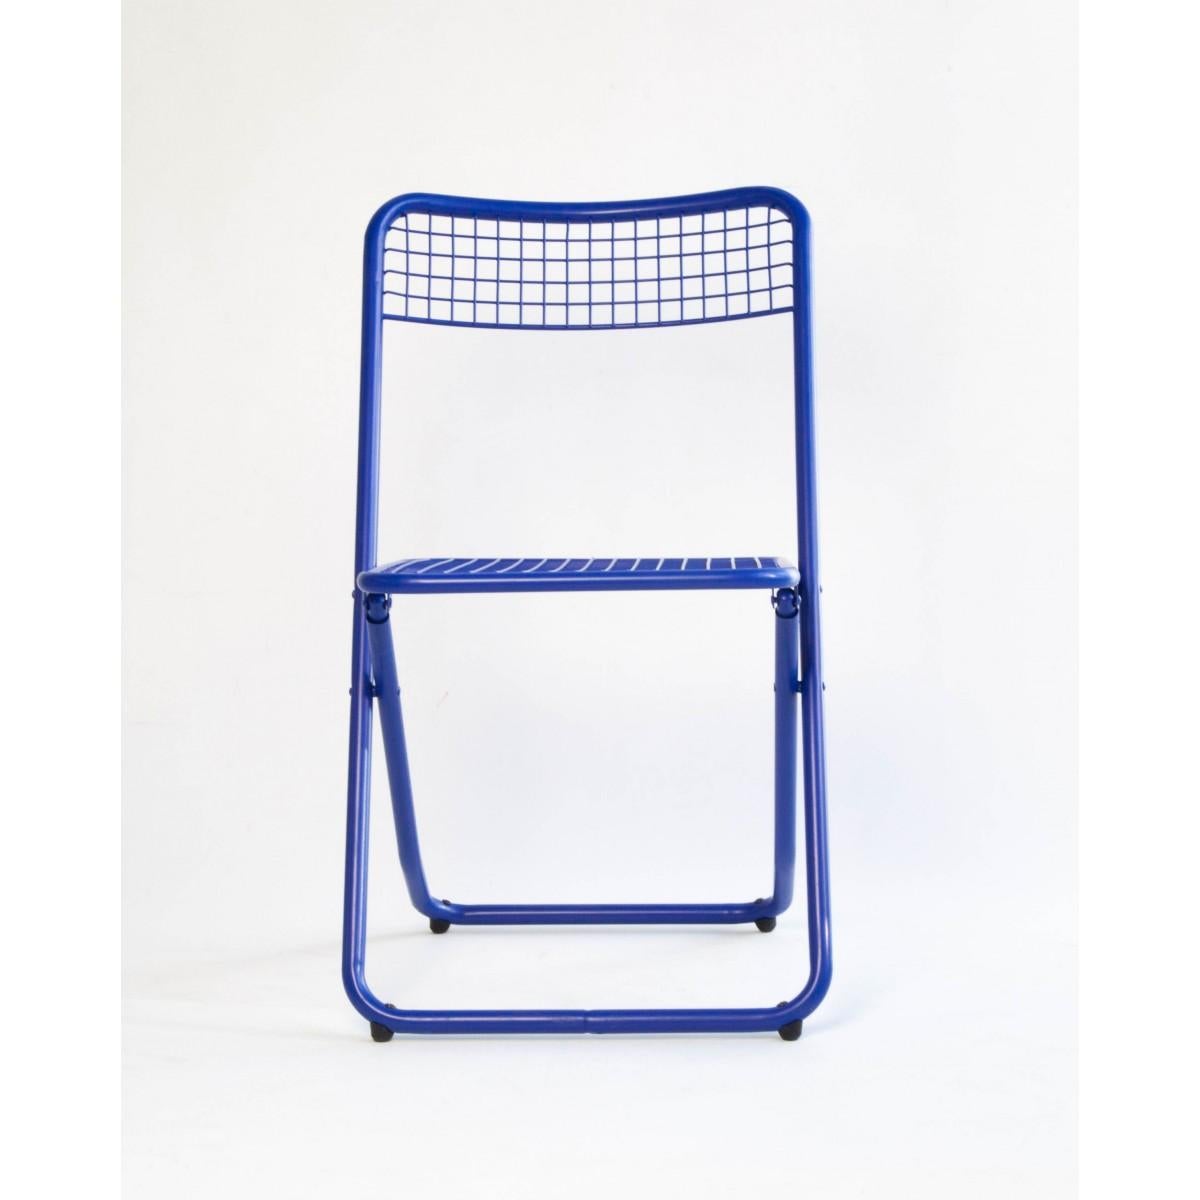 New folding chair blue 5002 by Houtique signed by Federico Giner, Valencia, Spain.

We have traveled to the past to pick up the 085 chair, an icon of postmodern design. We have returned to the present, reissued it and bathed in new colors and now we